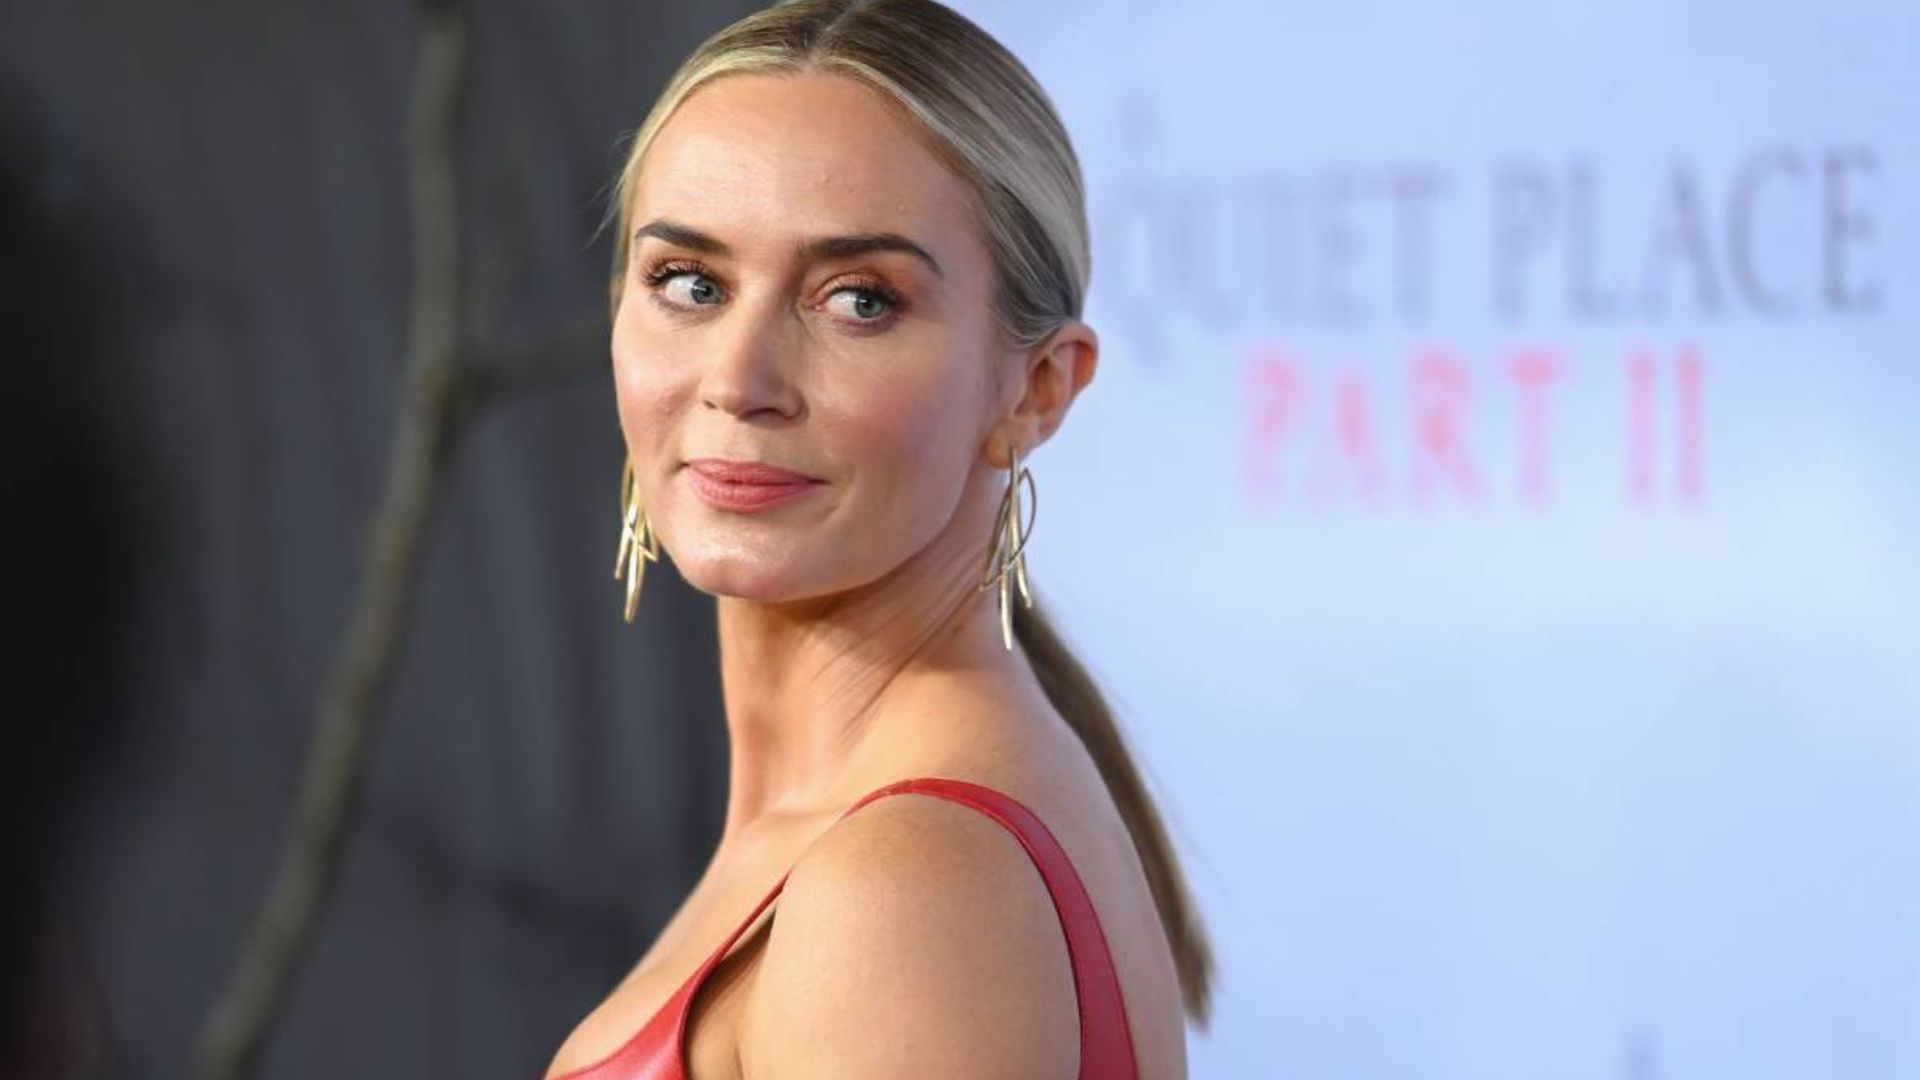 Emily Blunt turns heads in a stunning cut-out jumpsuit you can't miss